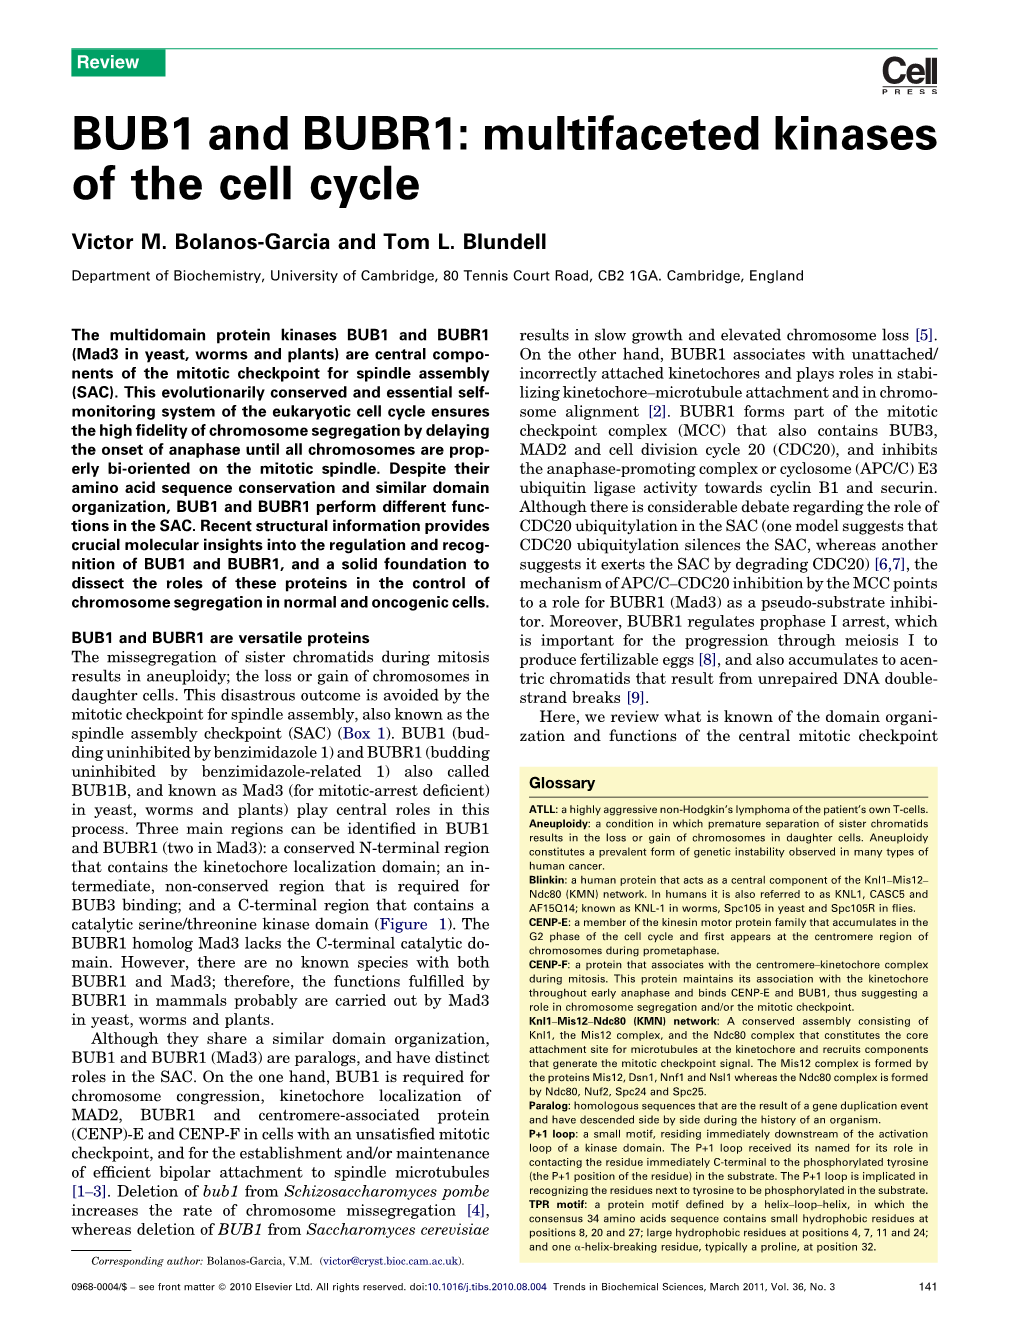 BUB1 and BUBR1: Multifaceted Kinases of the Cell Cycle